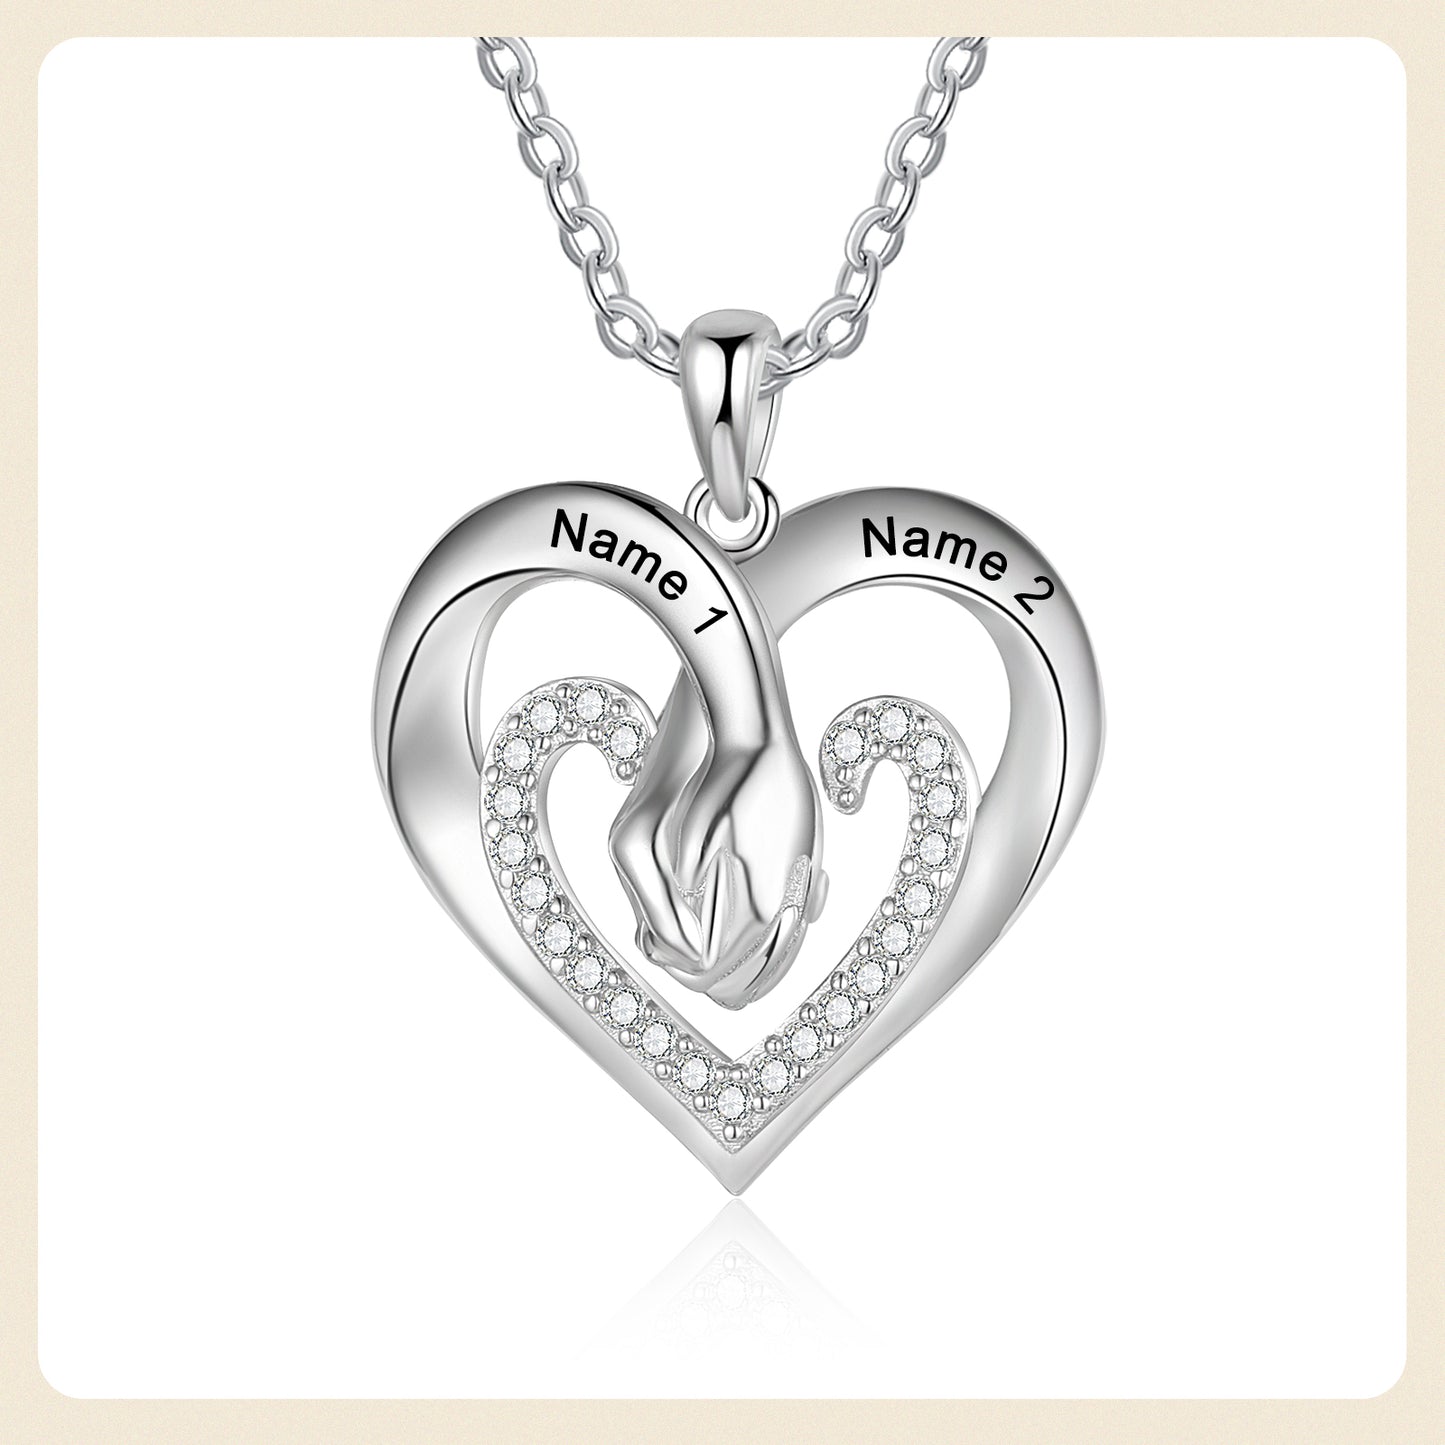 Custom Name Heart Necklace with Handing Hand